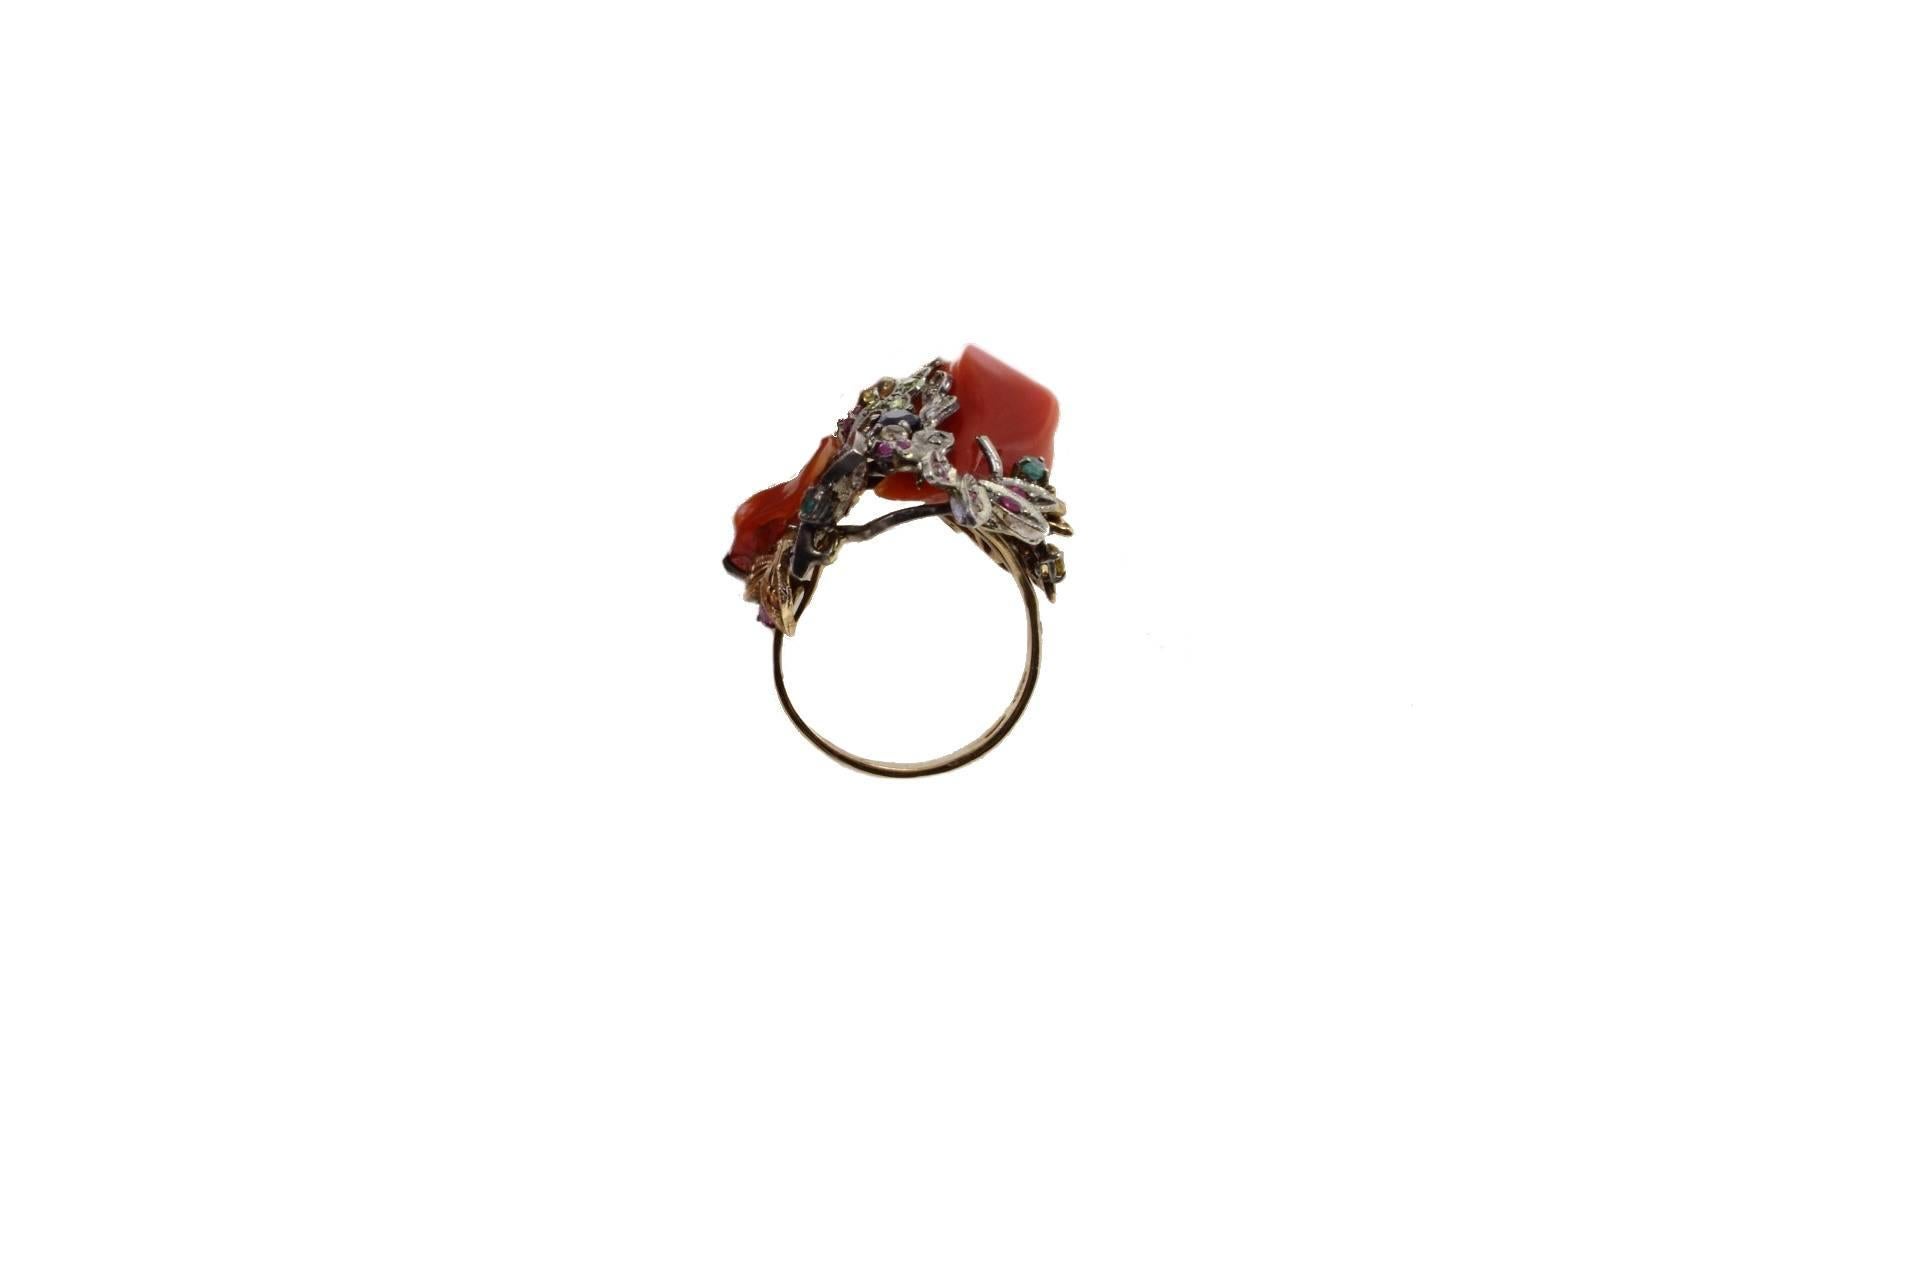 SHIPPING POLICY:
No additional costs will be added to this order.
Shipping costs will be totally covered by the seller (customs duties included).

Coral ring in 9kt yellow gold and silver embellished with a cluster of diamonds, multi-colour